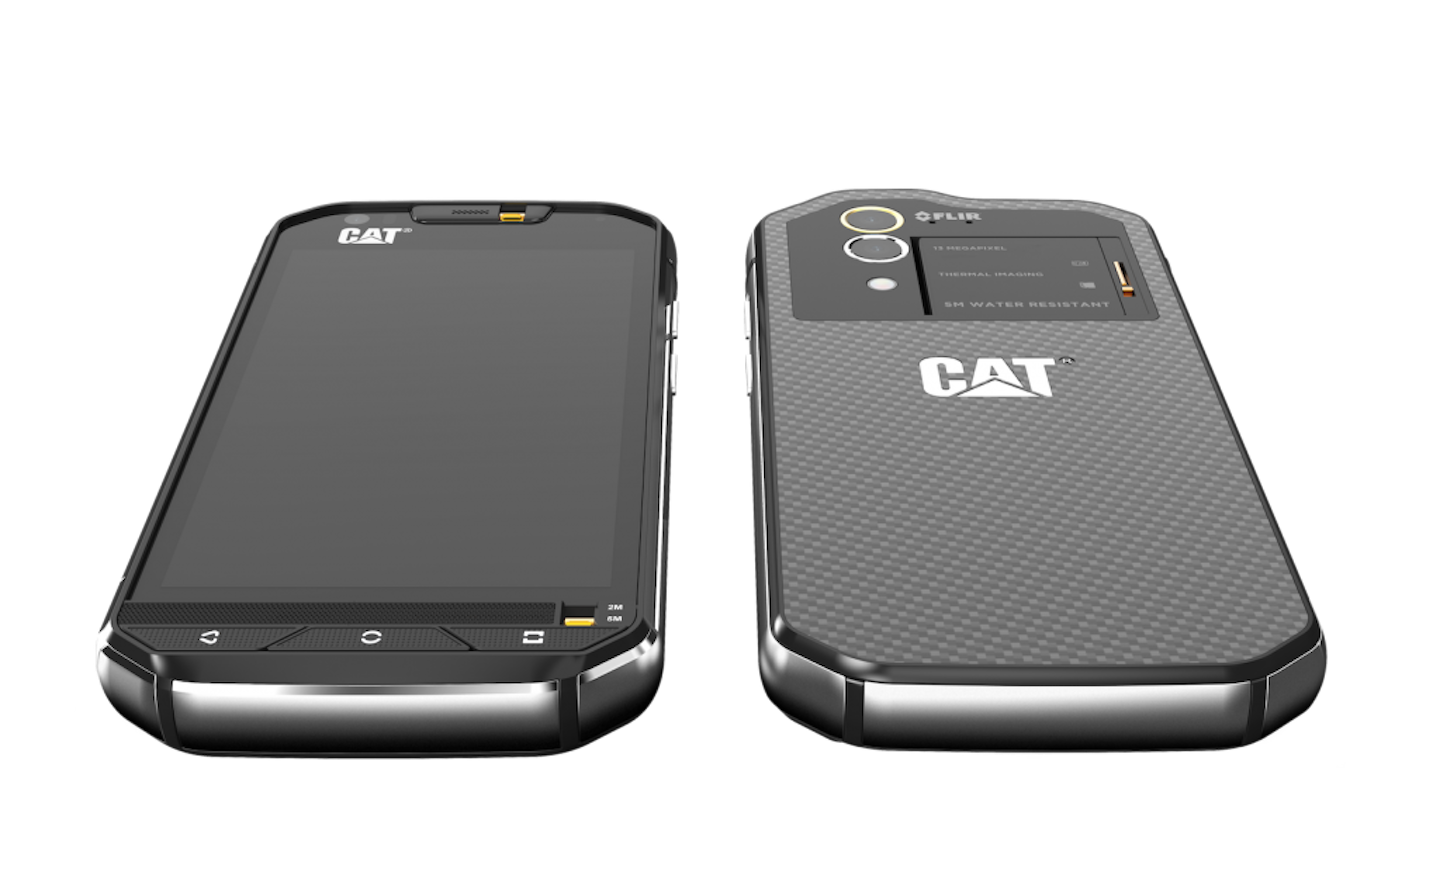 Caterpillar's latest phone offers builtin thermal camera Total